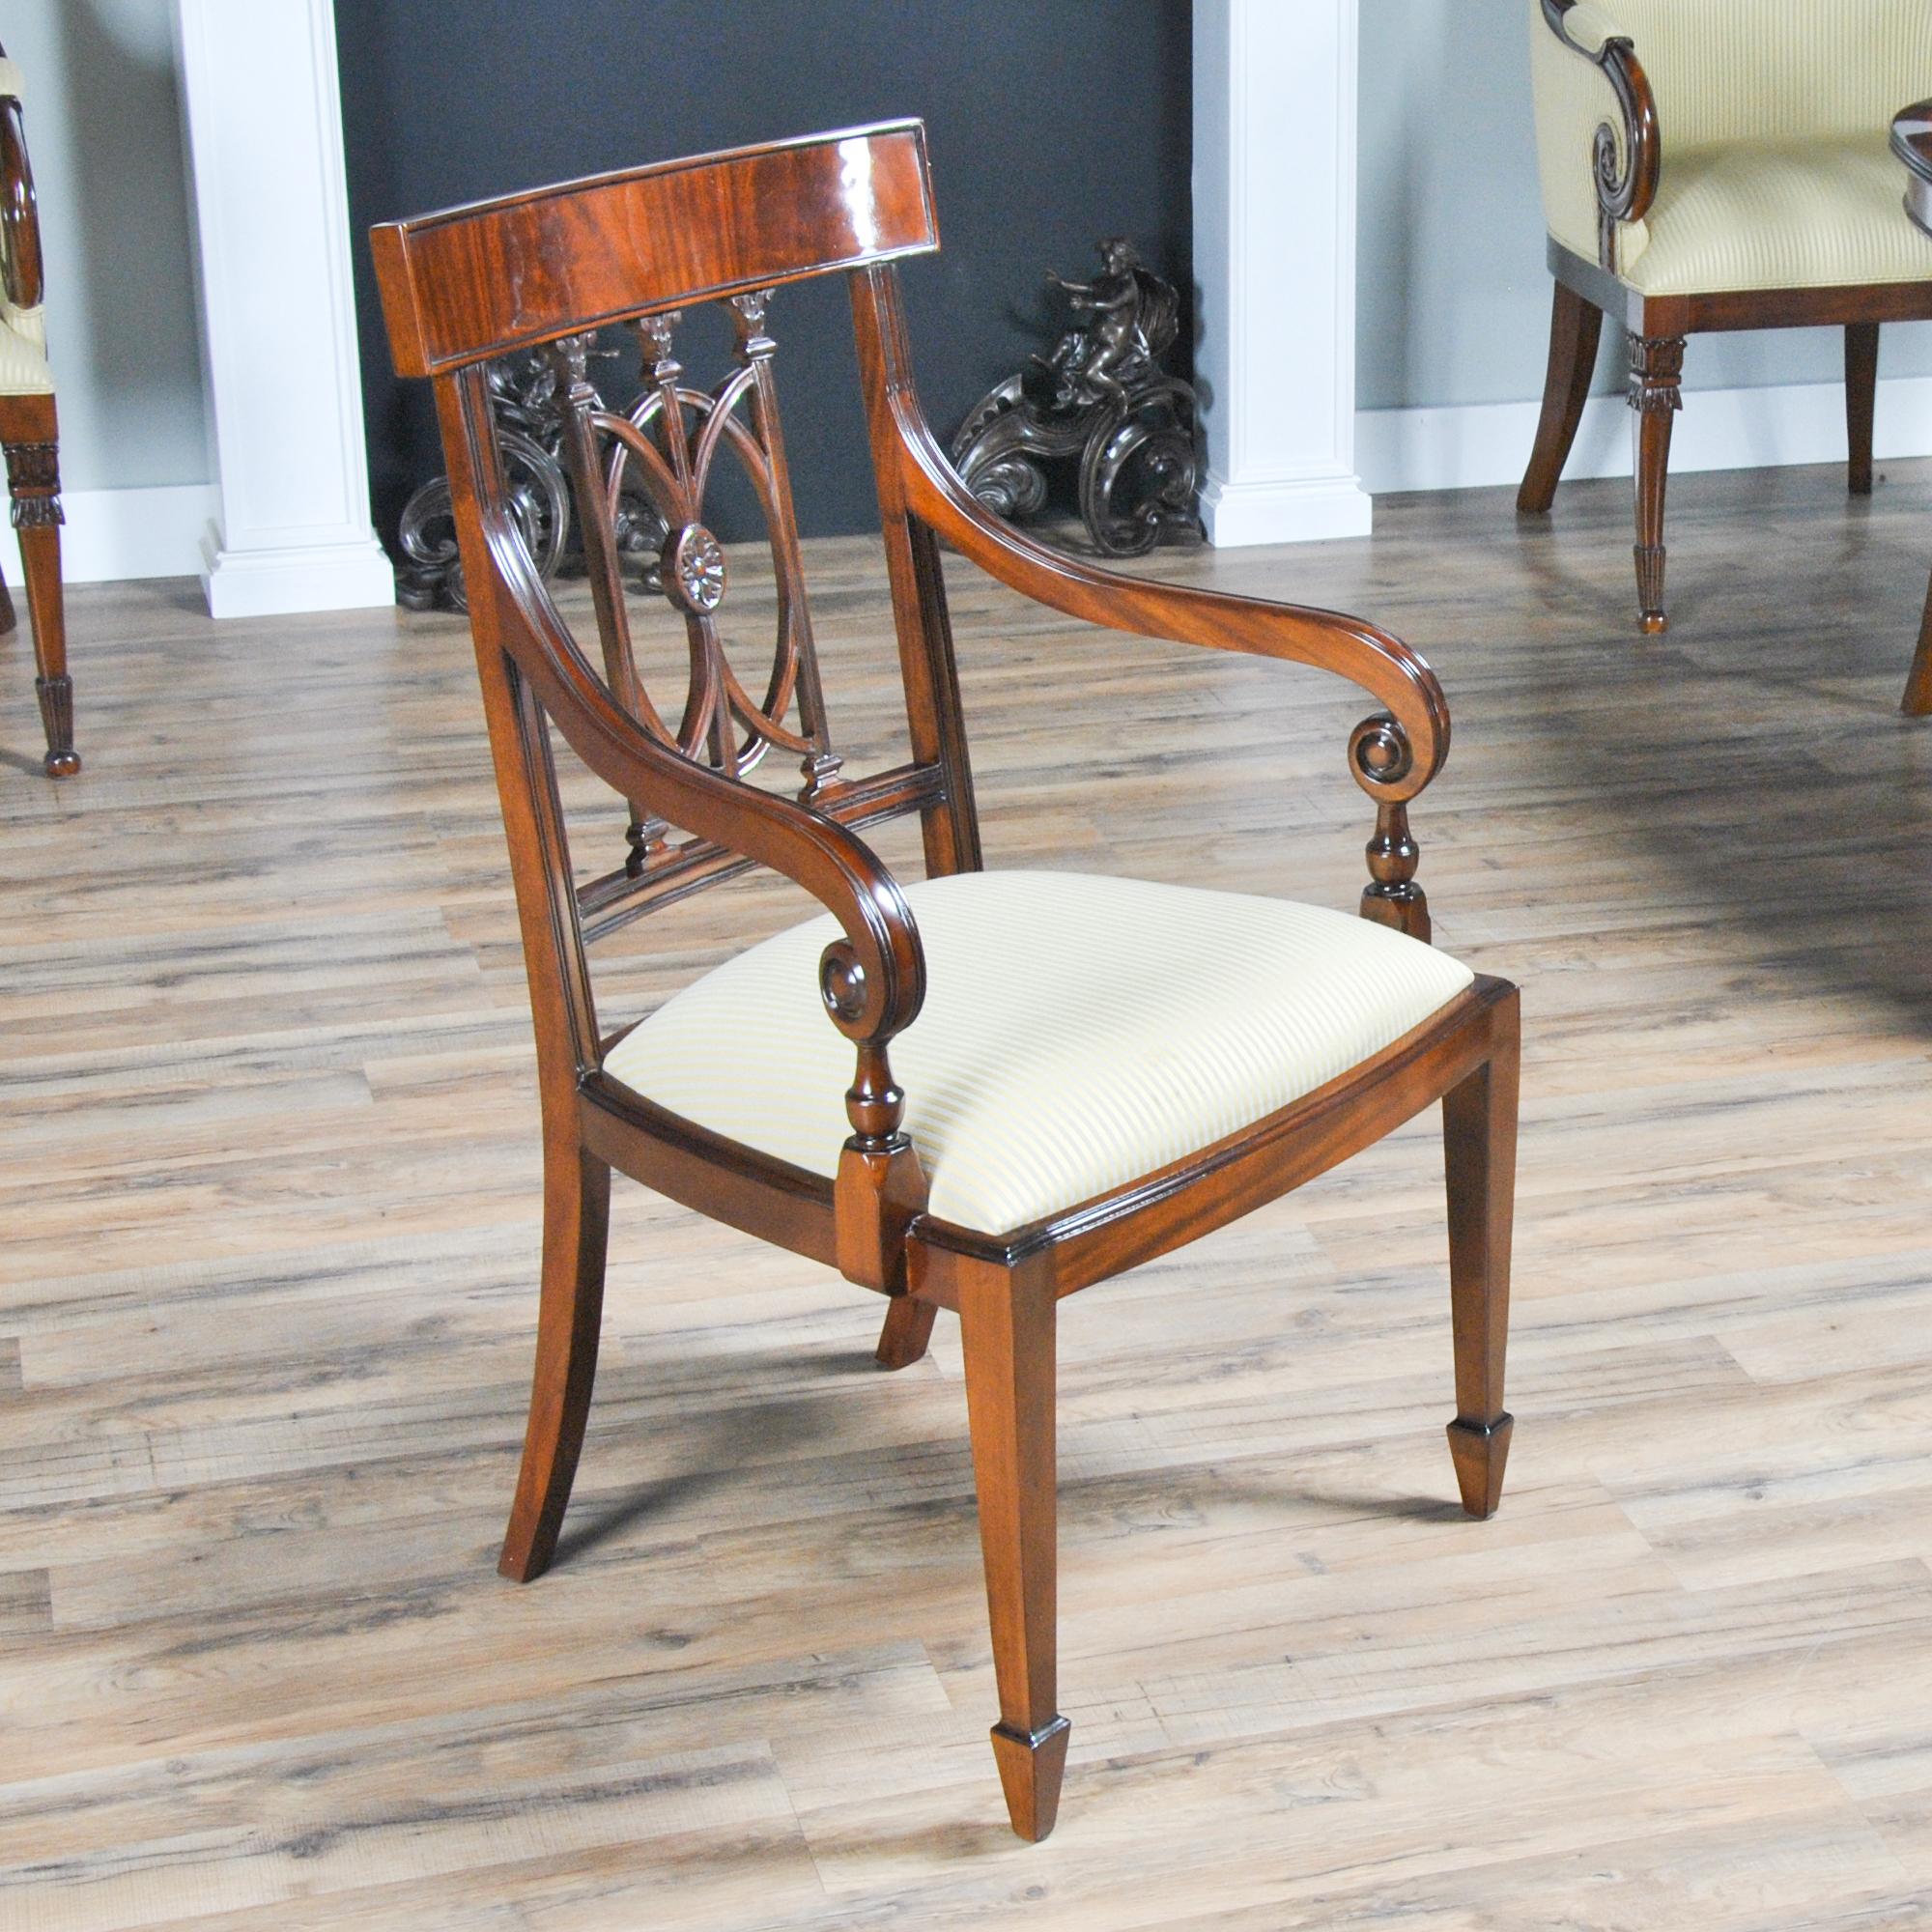 These Mahogany Hepplewhite Chairs, comprise of a set with 2 arm chairs and eight side chairs. They are a high quality dining chair with enough hand carved detail in the back for them to stand apart from mass produced counterparts. These chairs have